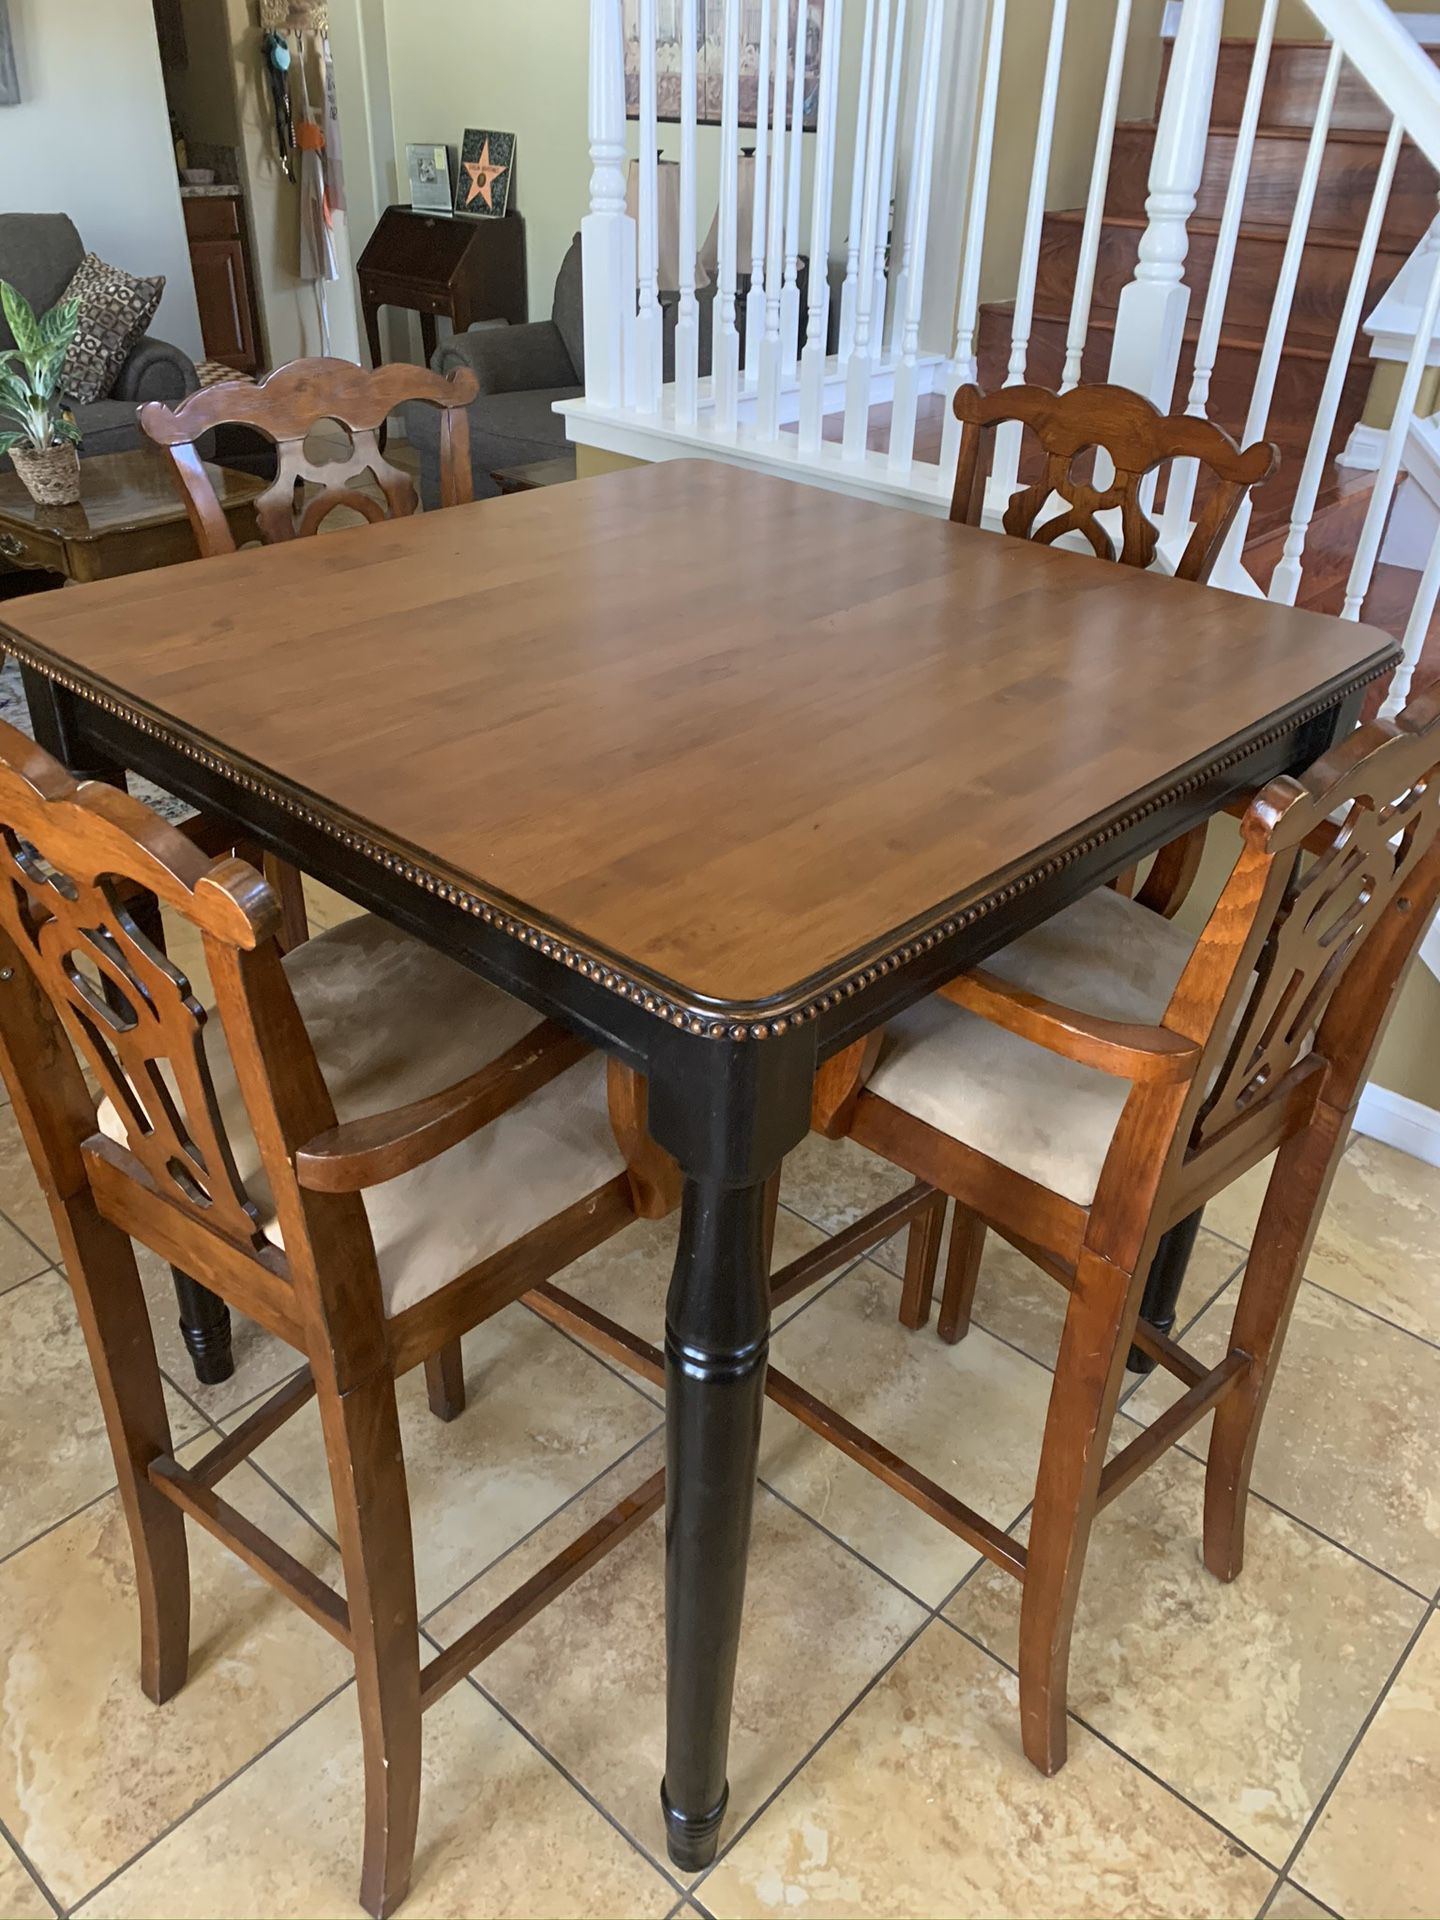 KITCHEN TABLE SET WITH FOUR CHAIRS